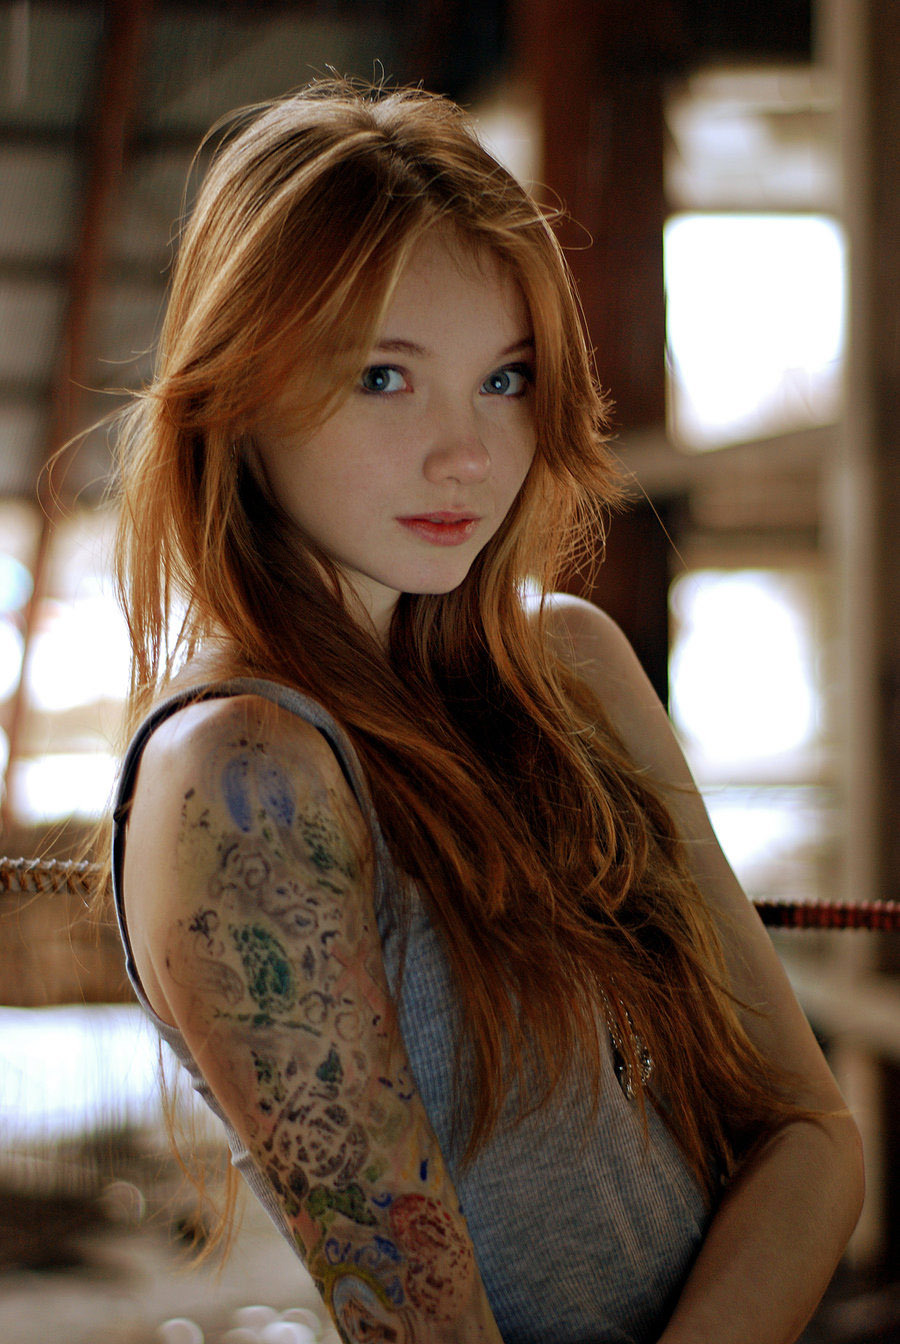 OMG she&rsquo;s beautiful. ♥  Does anybody know who she is? ♥  More girls